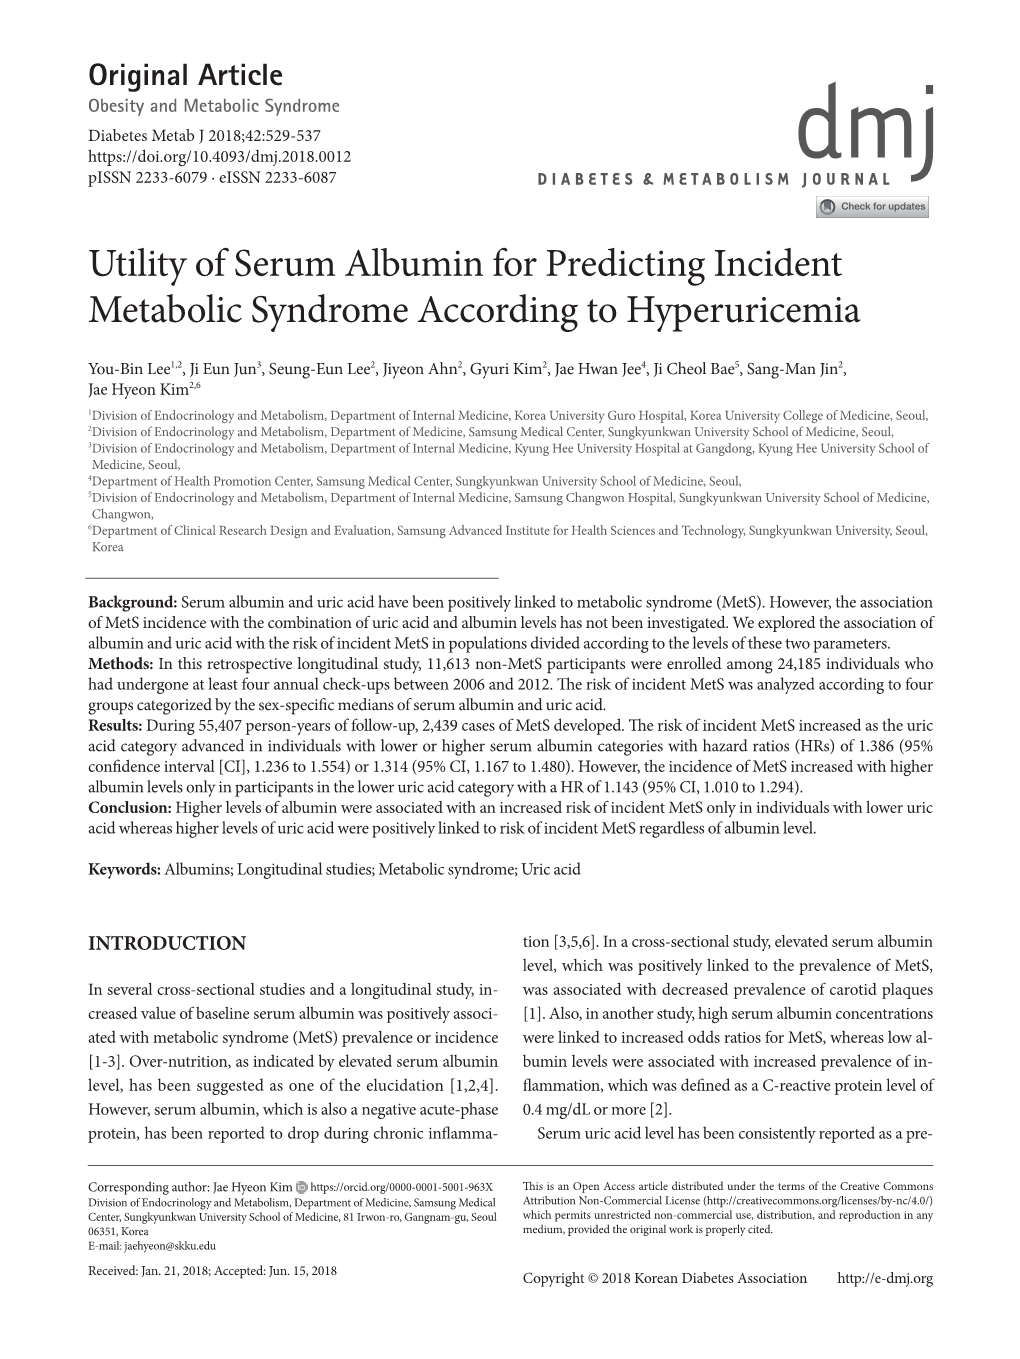 Utility of Serum Albumin for Predicting Incident Metabolic Syndrome According to Hyperuricemia